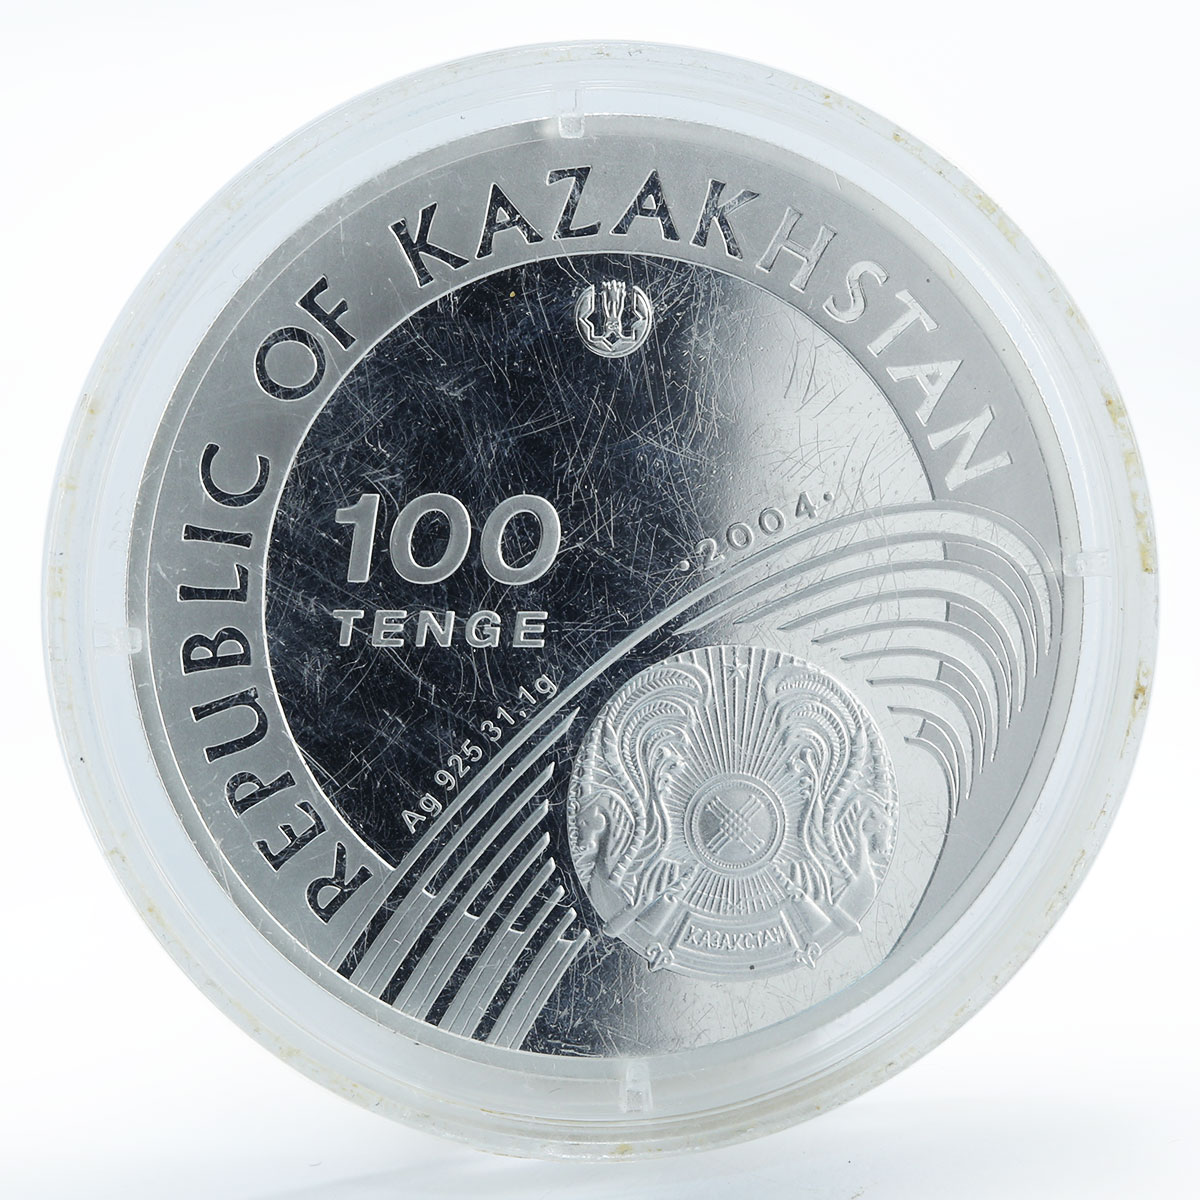 Kazakhstan 100 tenge Olympic Games Cycling Race silver proof coin 2004